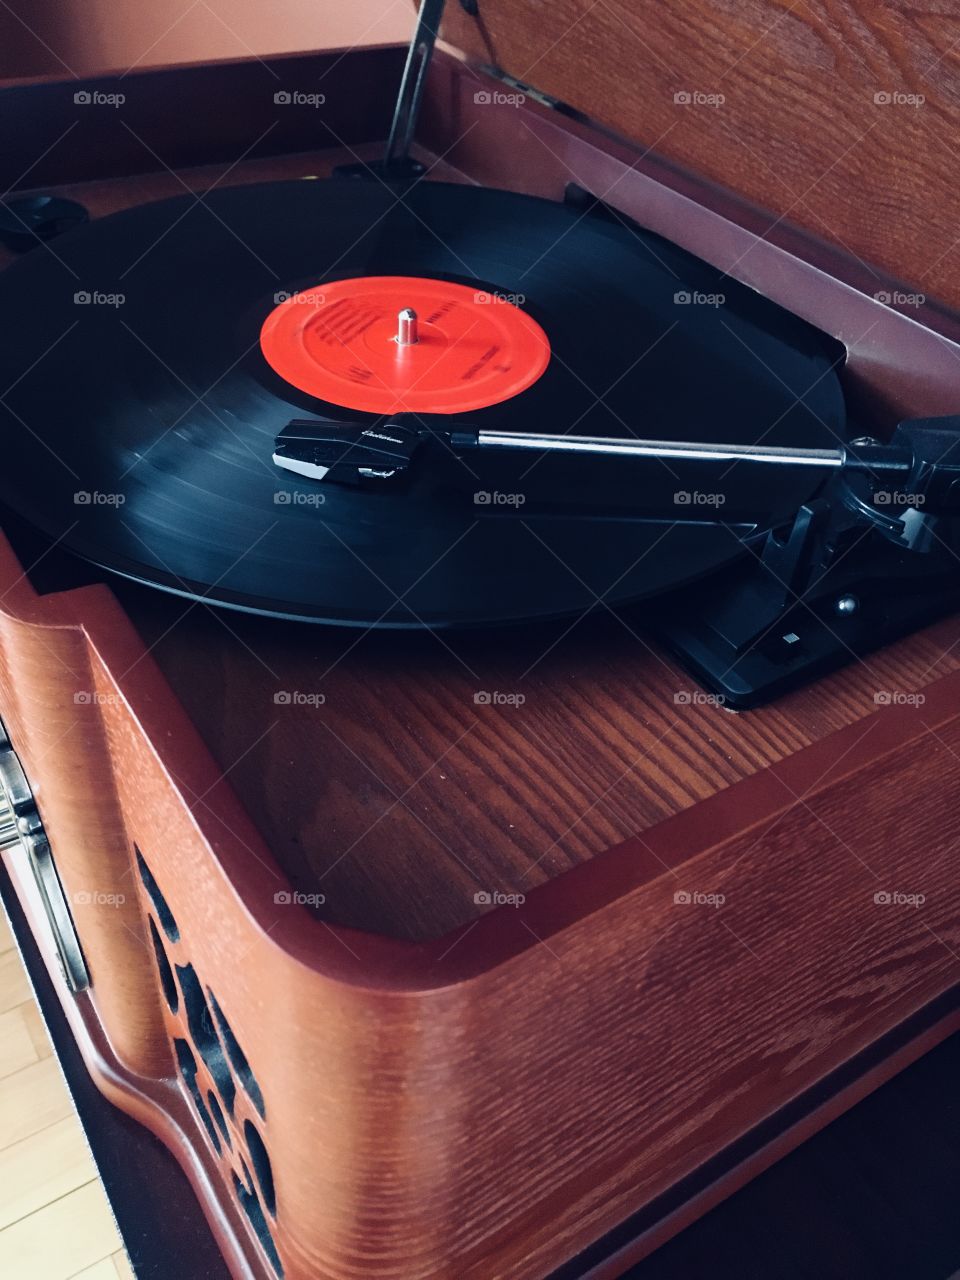 Vinyl record playing music on a vintage antique style wooden record player. 